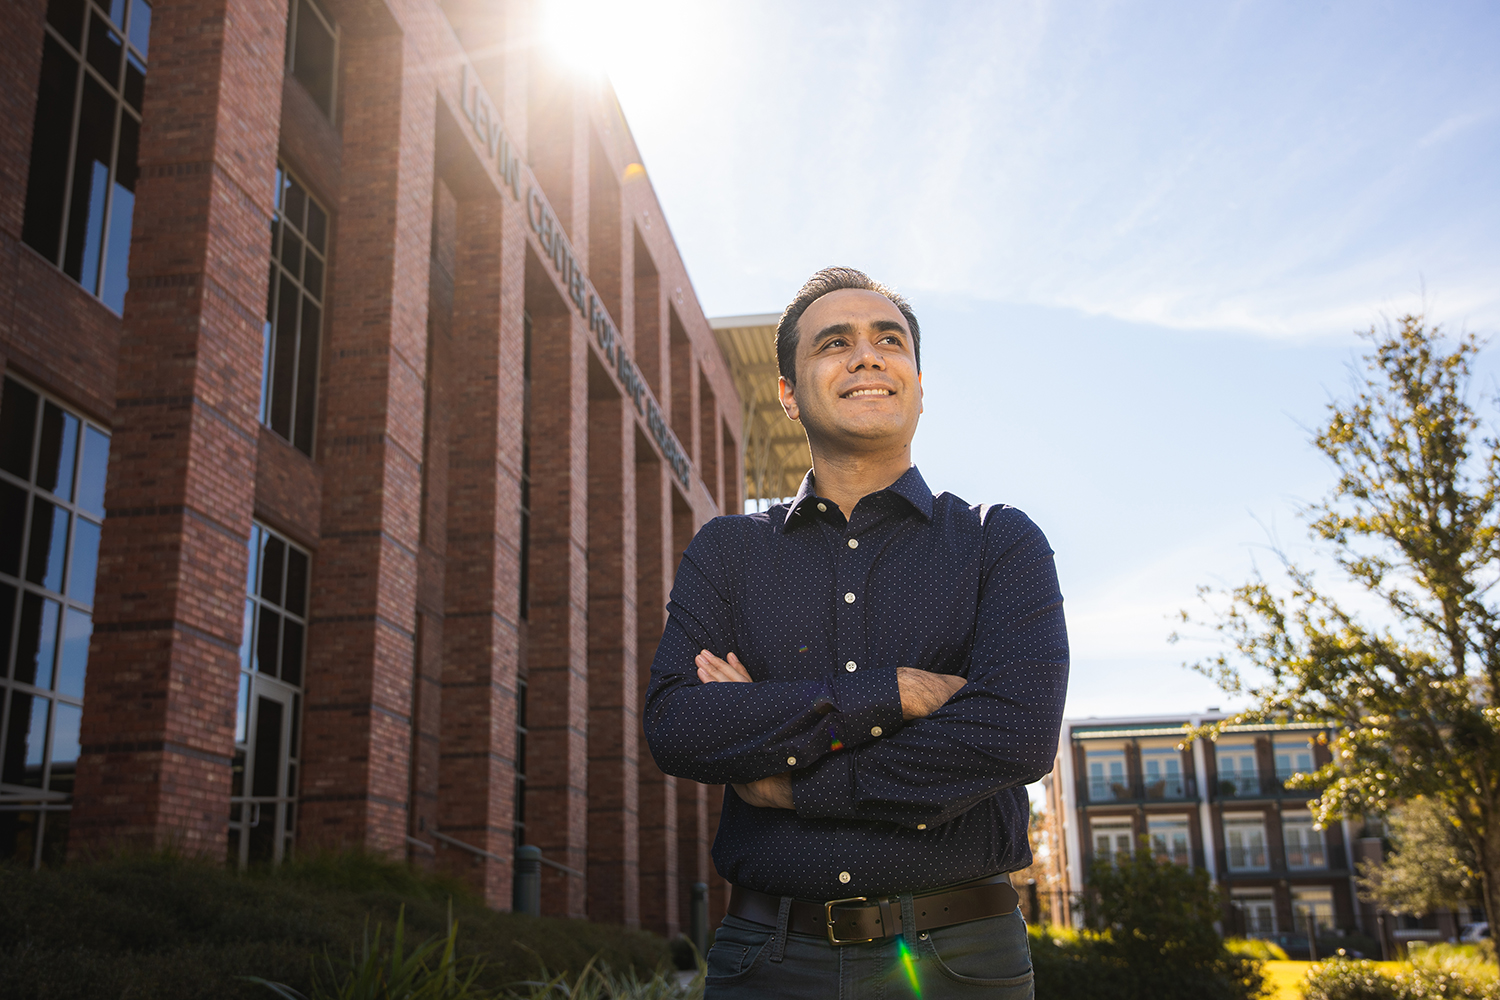 Taher Rahgooy, a Ph.D. candidate of the intelligent systems and robotics program launched by University of West Florida and the Institute for Human and Machine Cognition, became the program’s first graduate in the Fall of 2021.